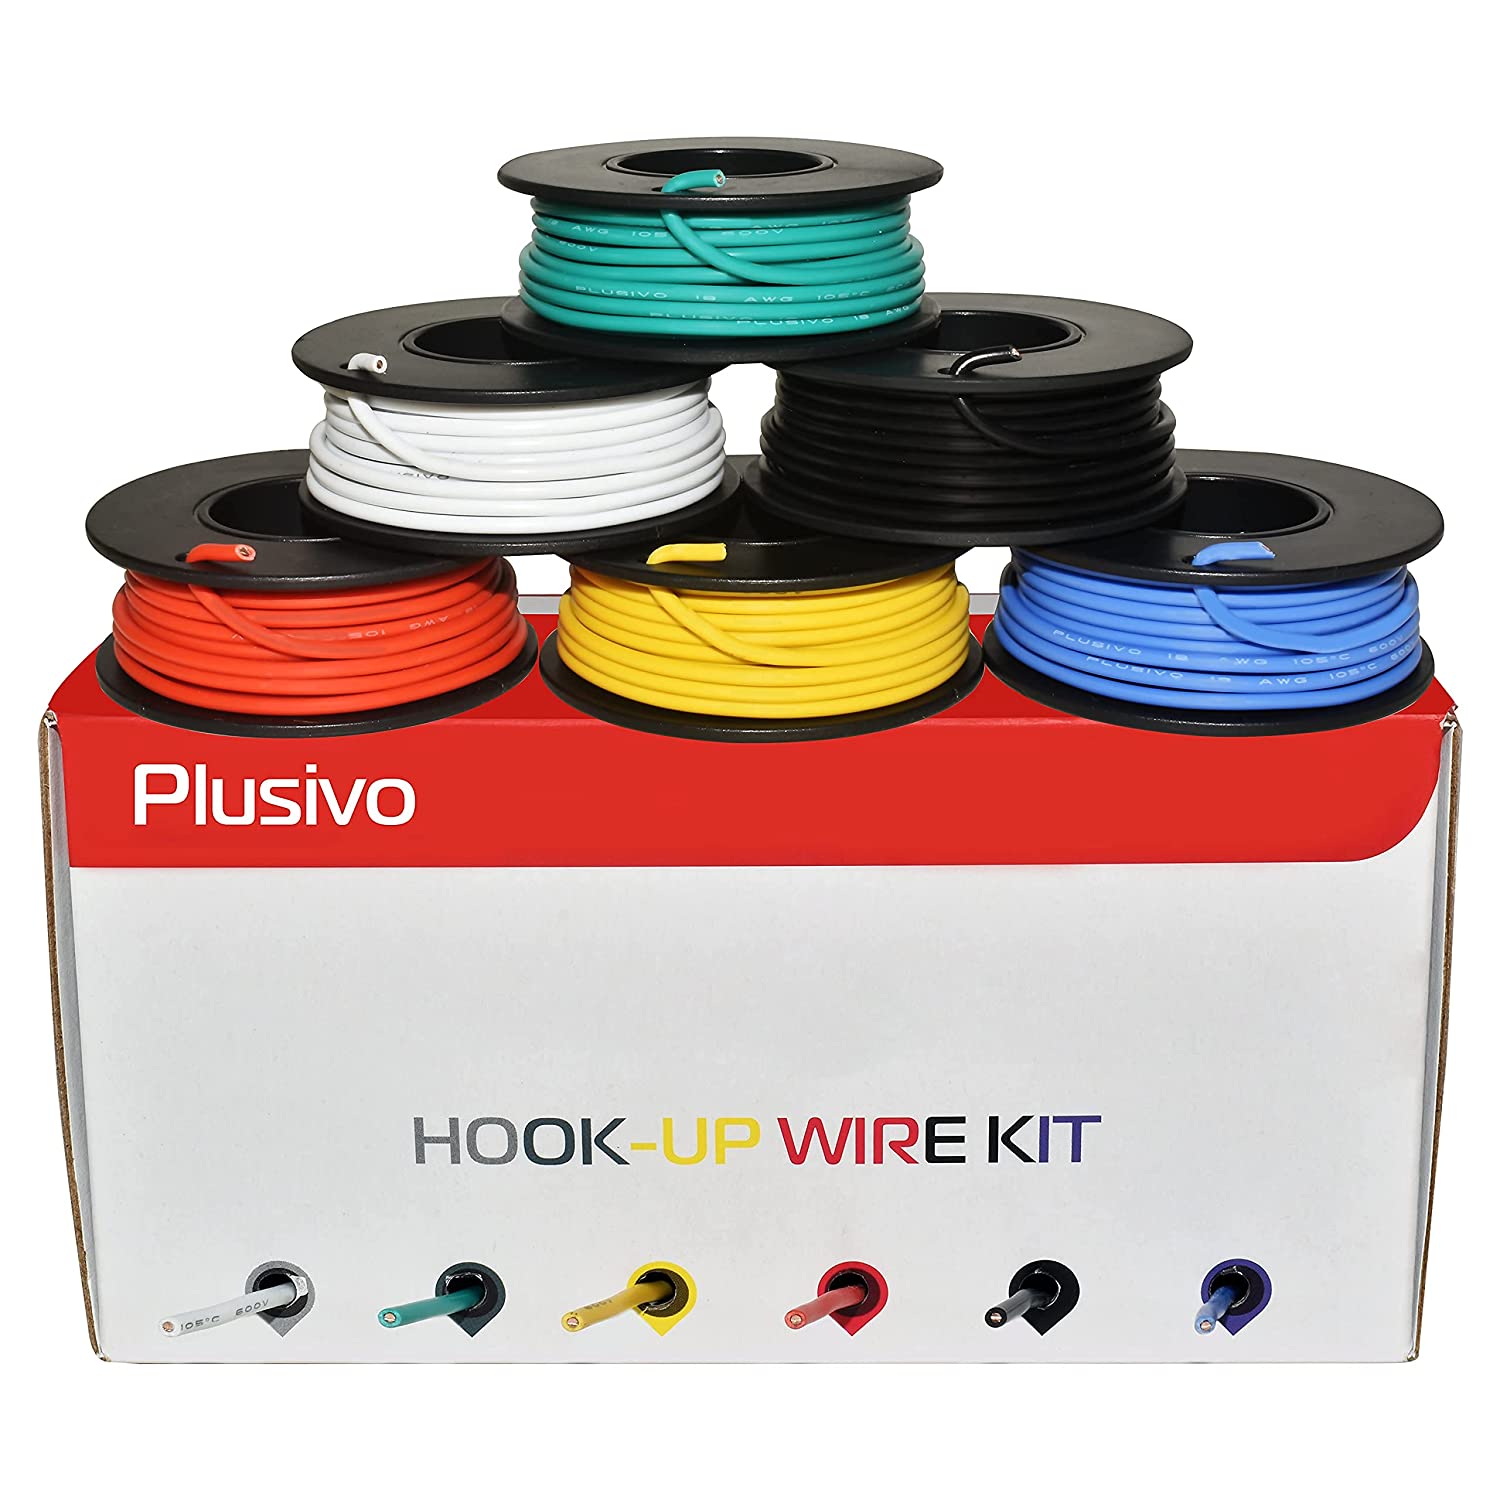 Plusivo 18AWG Hook up Wire Kit – 600V Pre-Tinned Solid Core Wire of 6 Colors x 5M